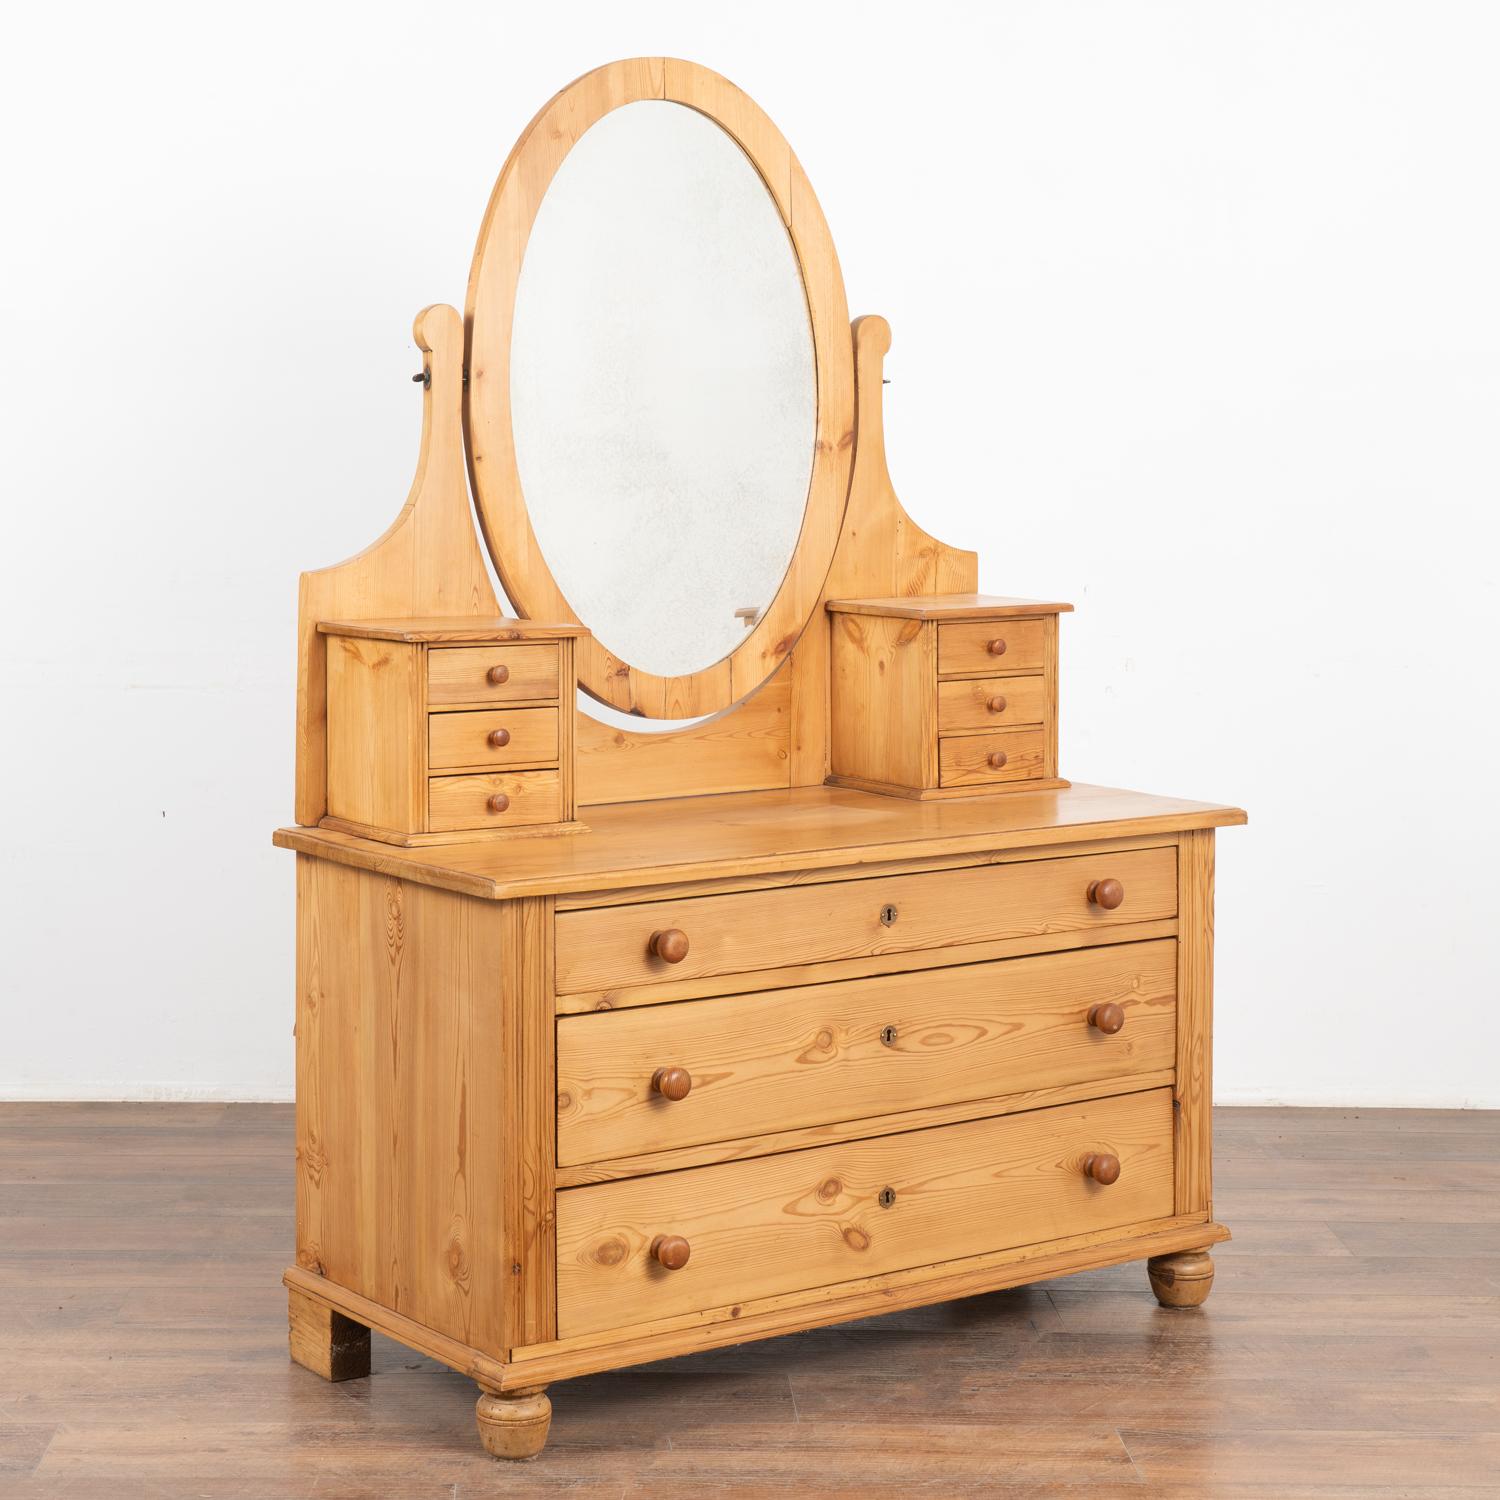 Lovely country pine vanity or dressing table with mirror.
Six small drawers, adjustable mirror, and three large lower drawers.
Restored, stable and ready for use. This vanity has been given a waxed finish.
All scratches, cracks, dings, or age